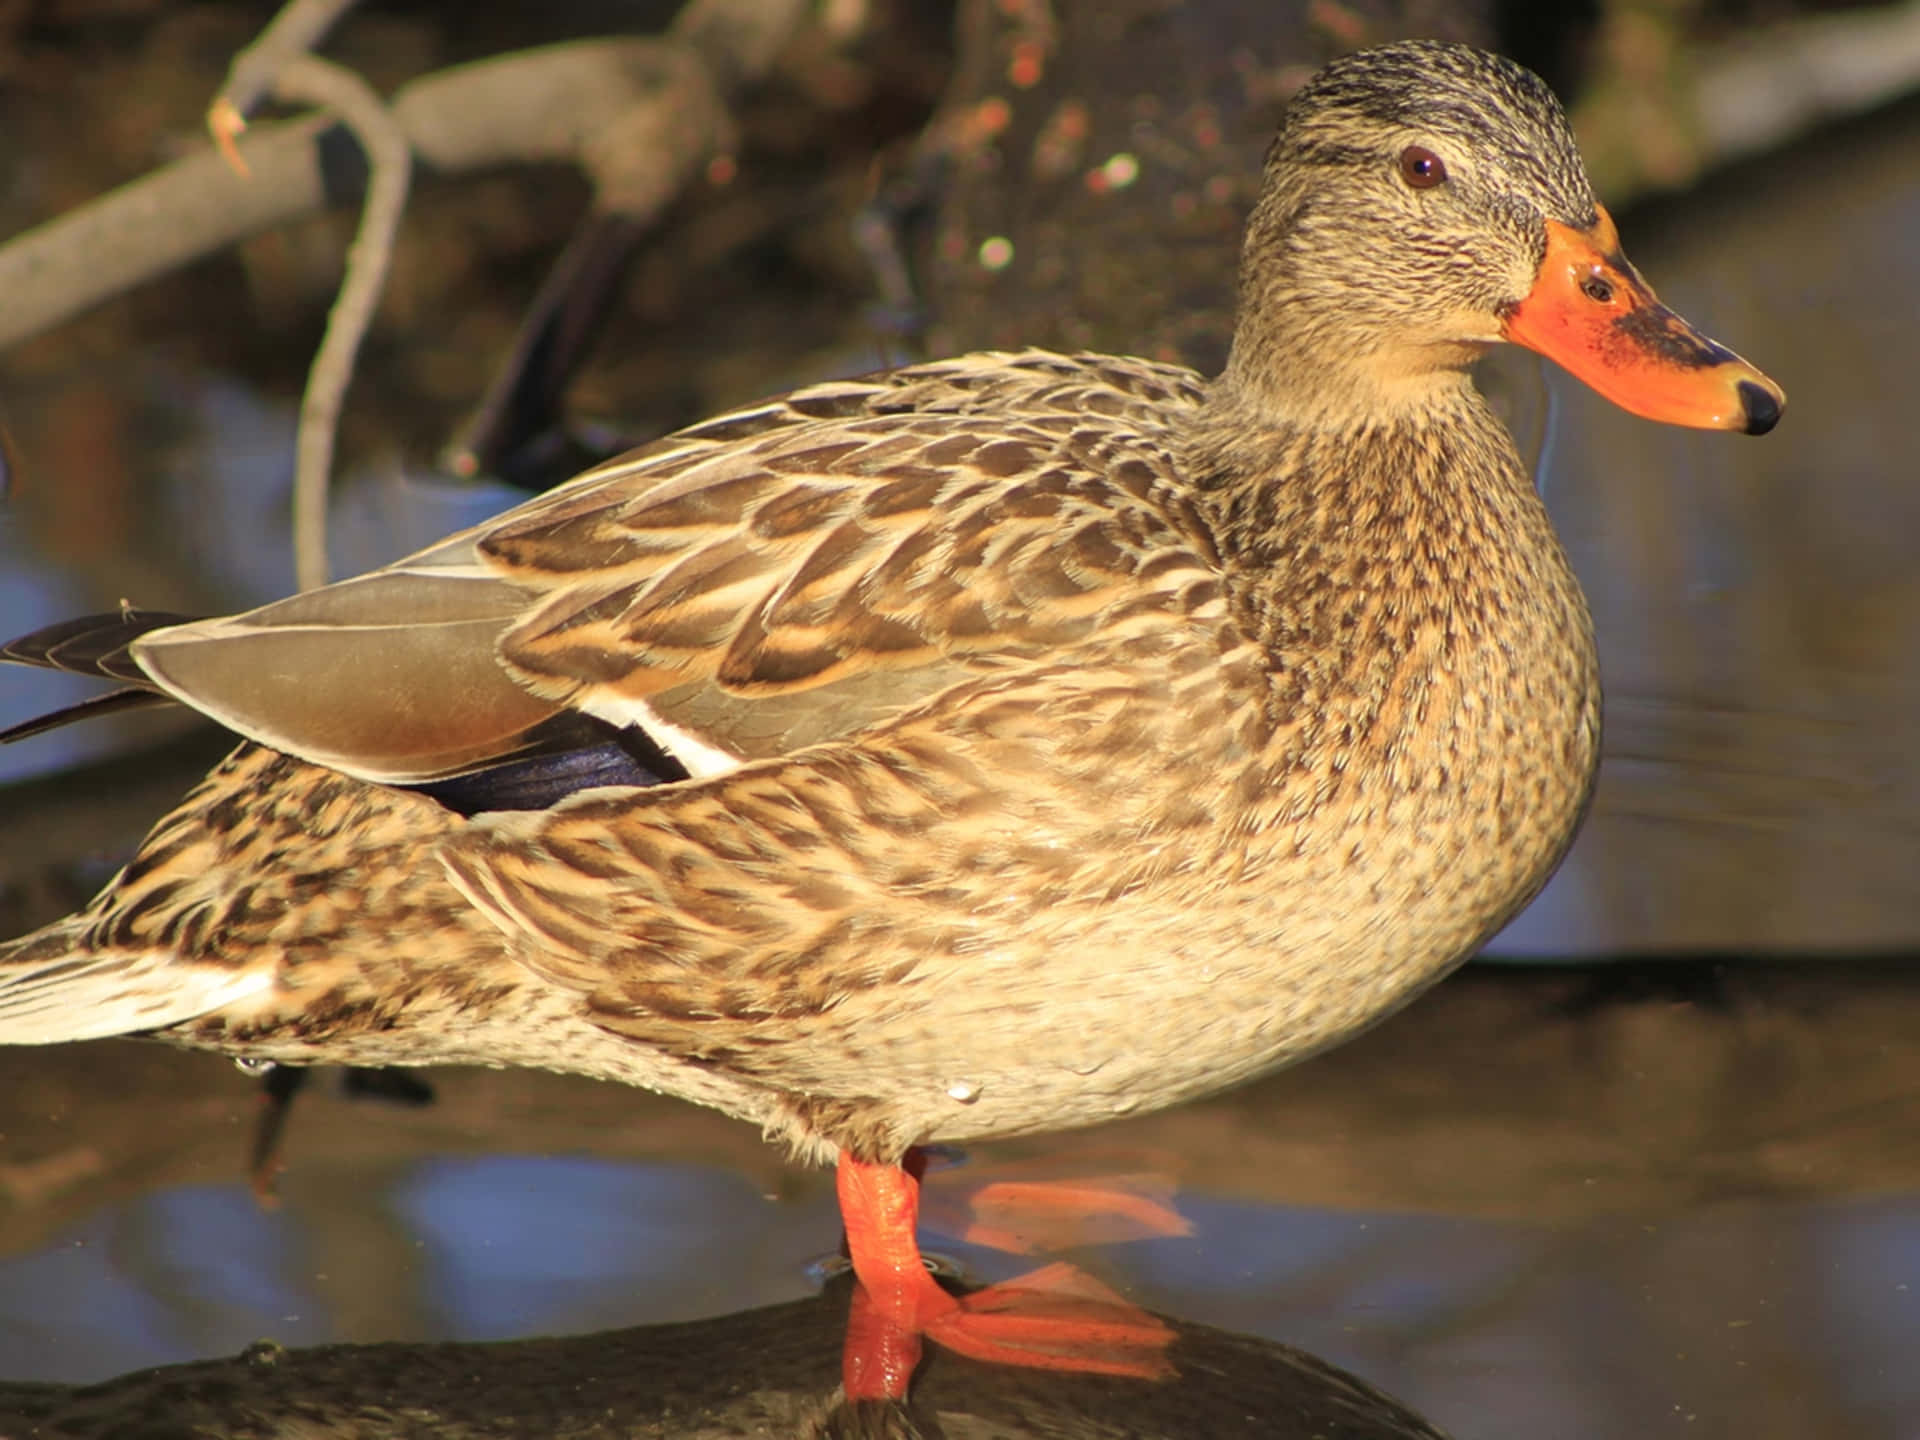 A beautiful female duck swimming in the water.